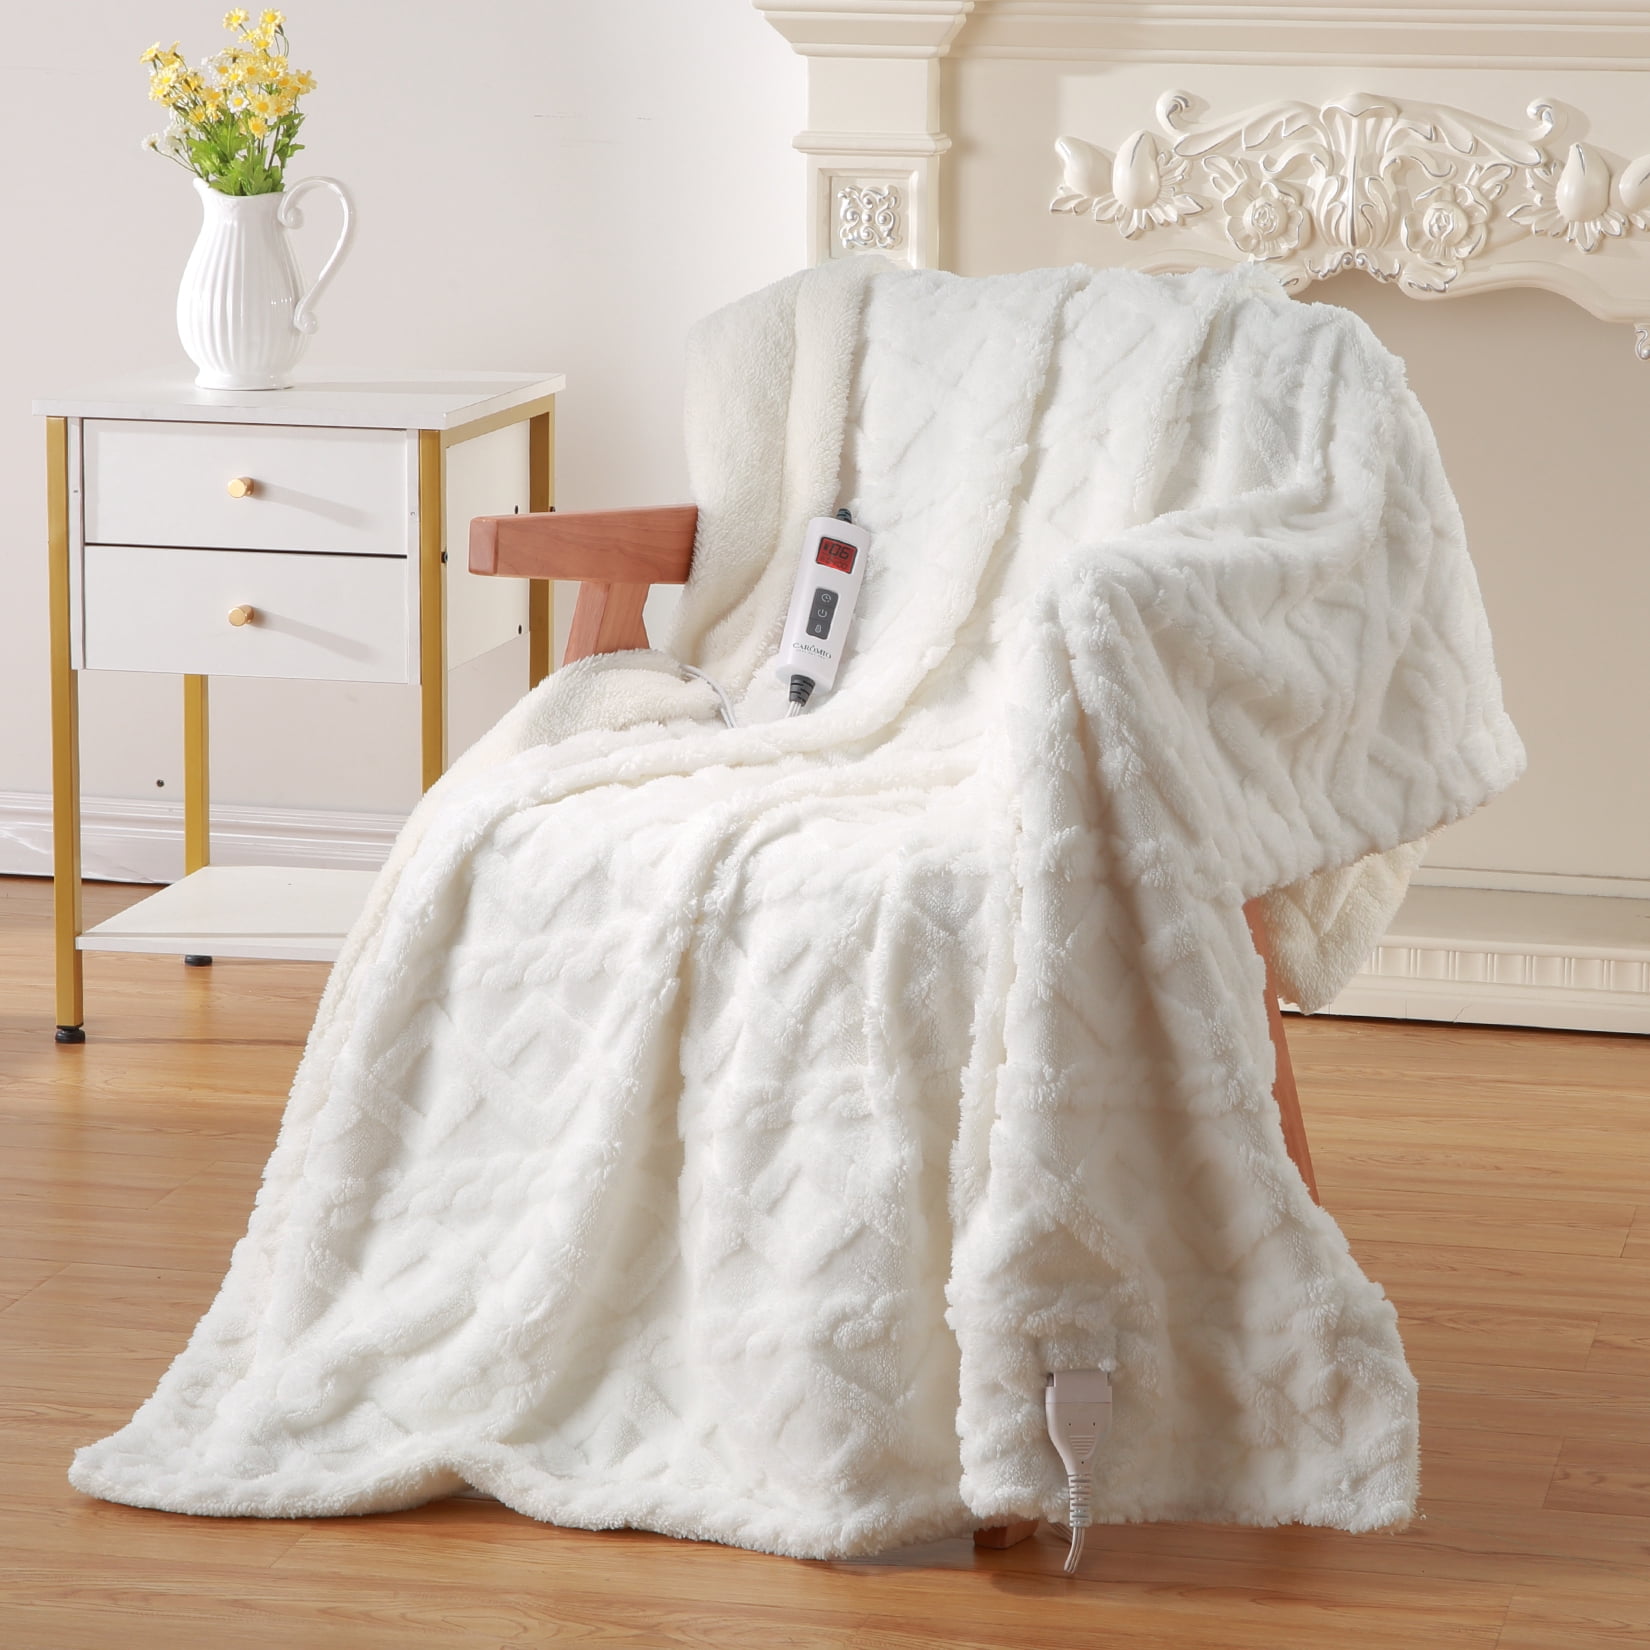 Heating Blanket, Thick Tufted Electric Blanket Throw With 6